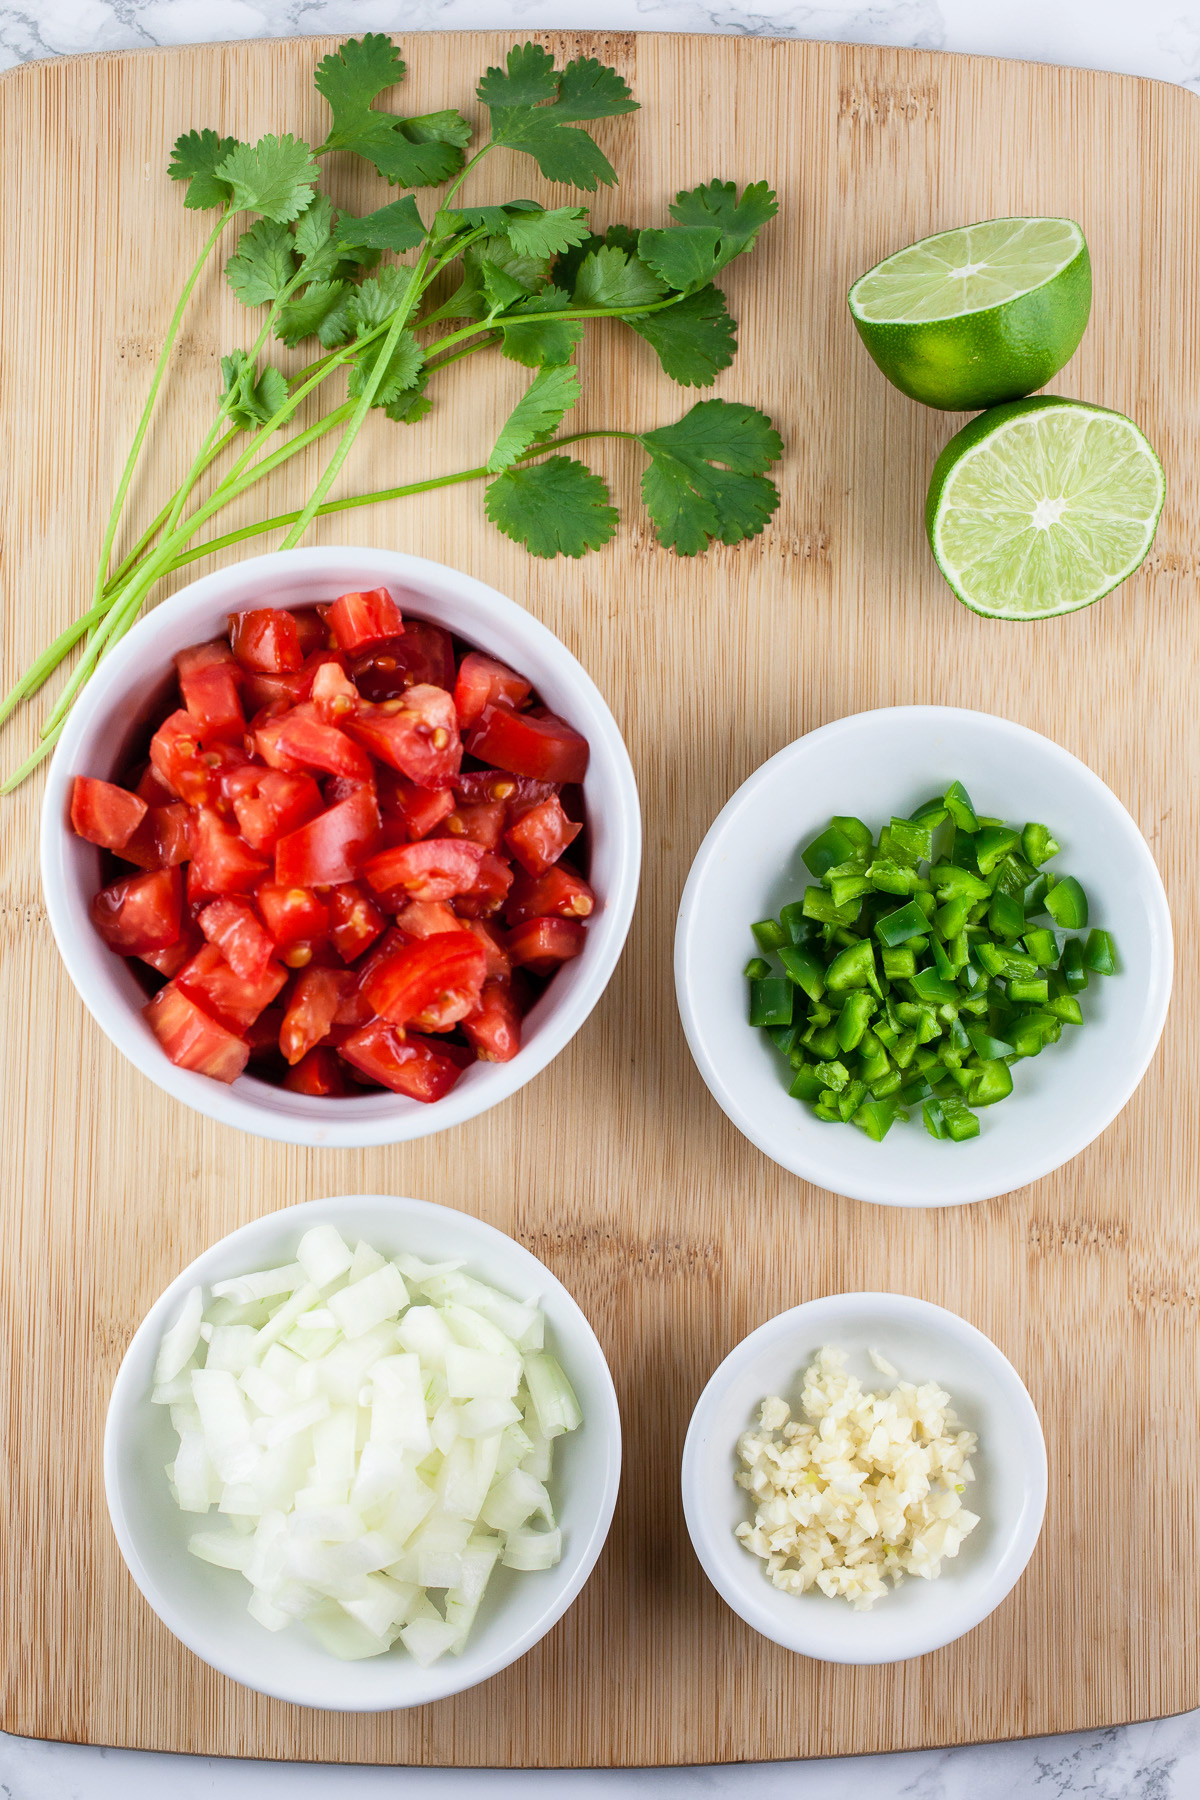 Minced garlic, onions, jalapeno, tomatoes, cilantro, and lime on wooden cutting board.